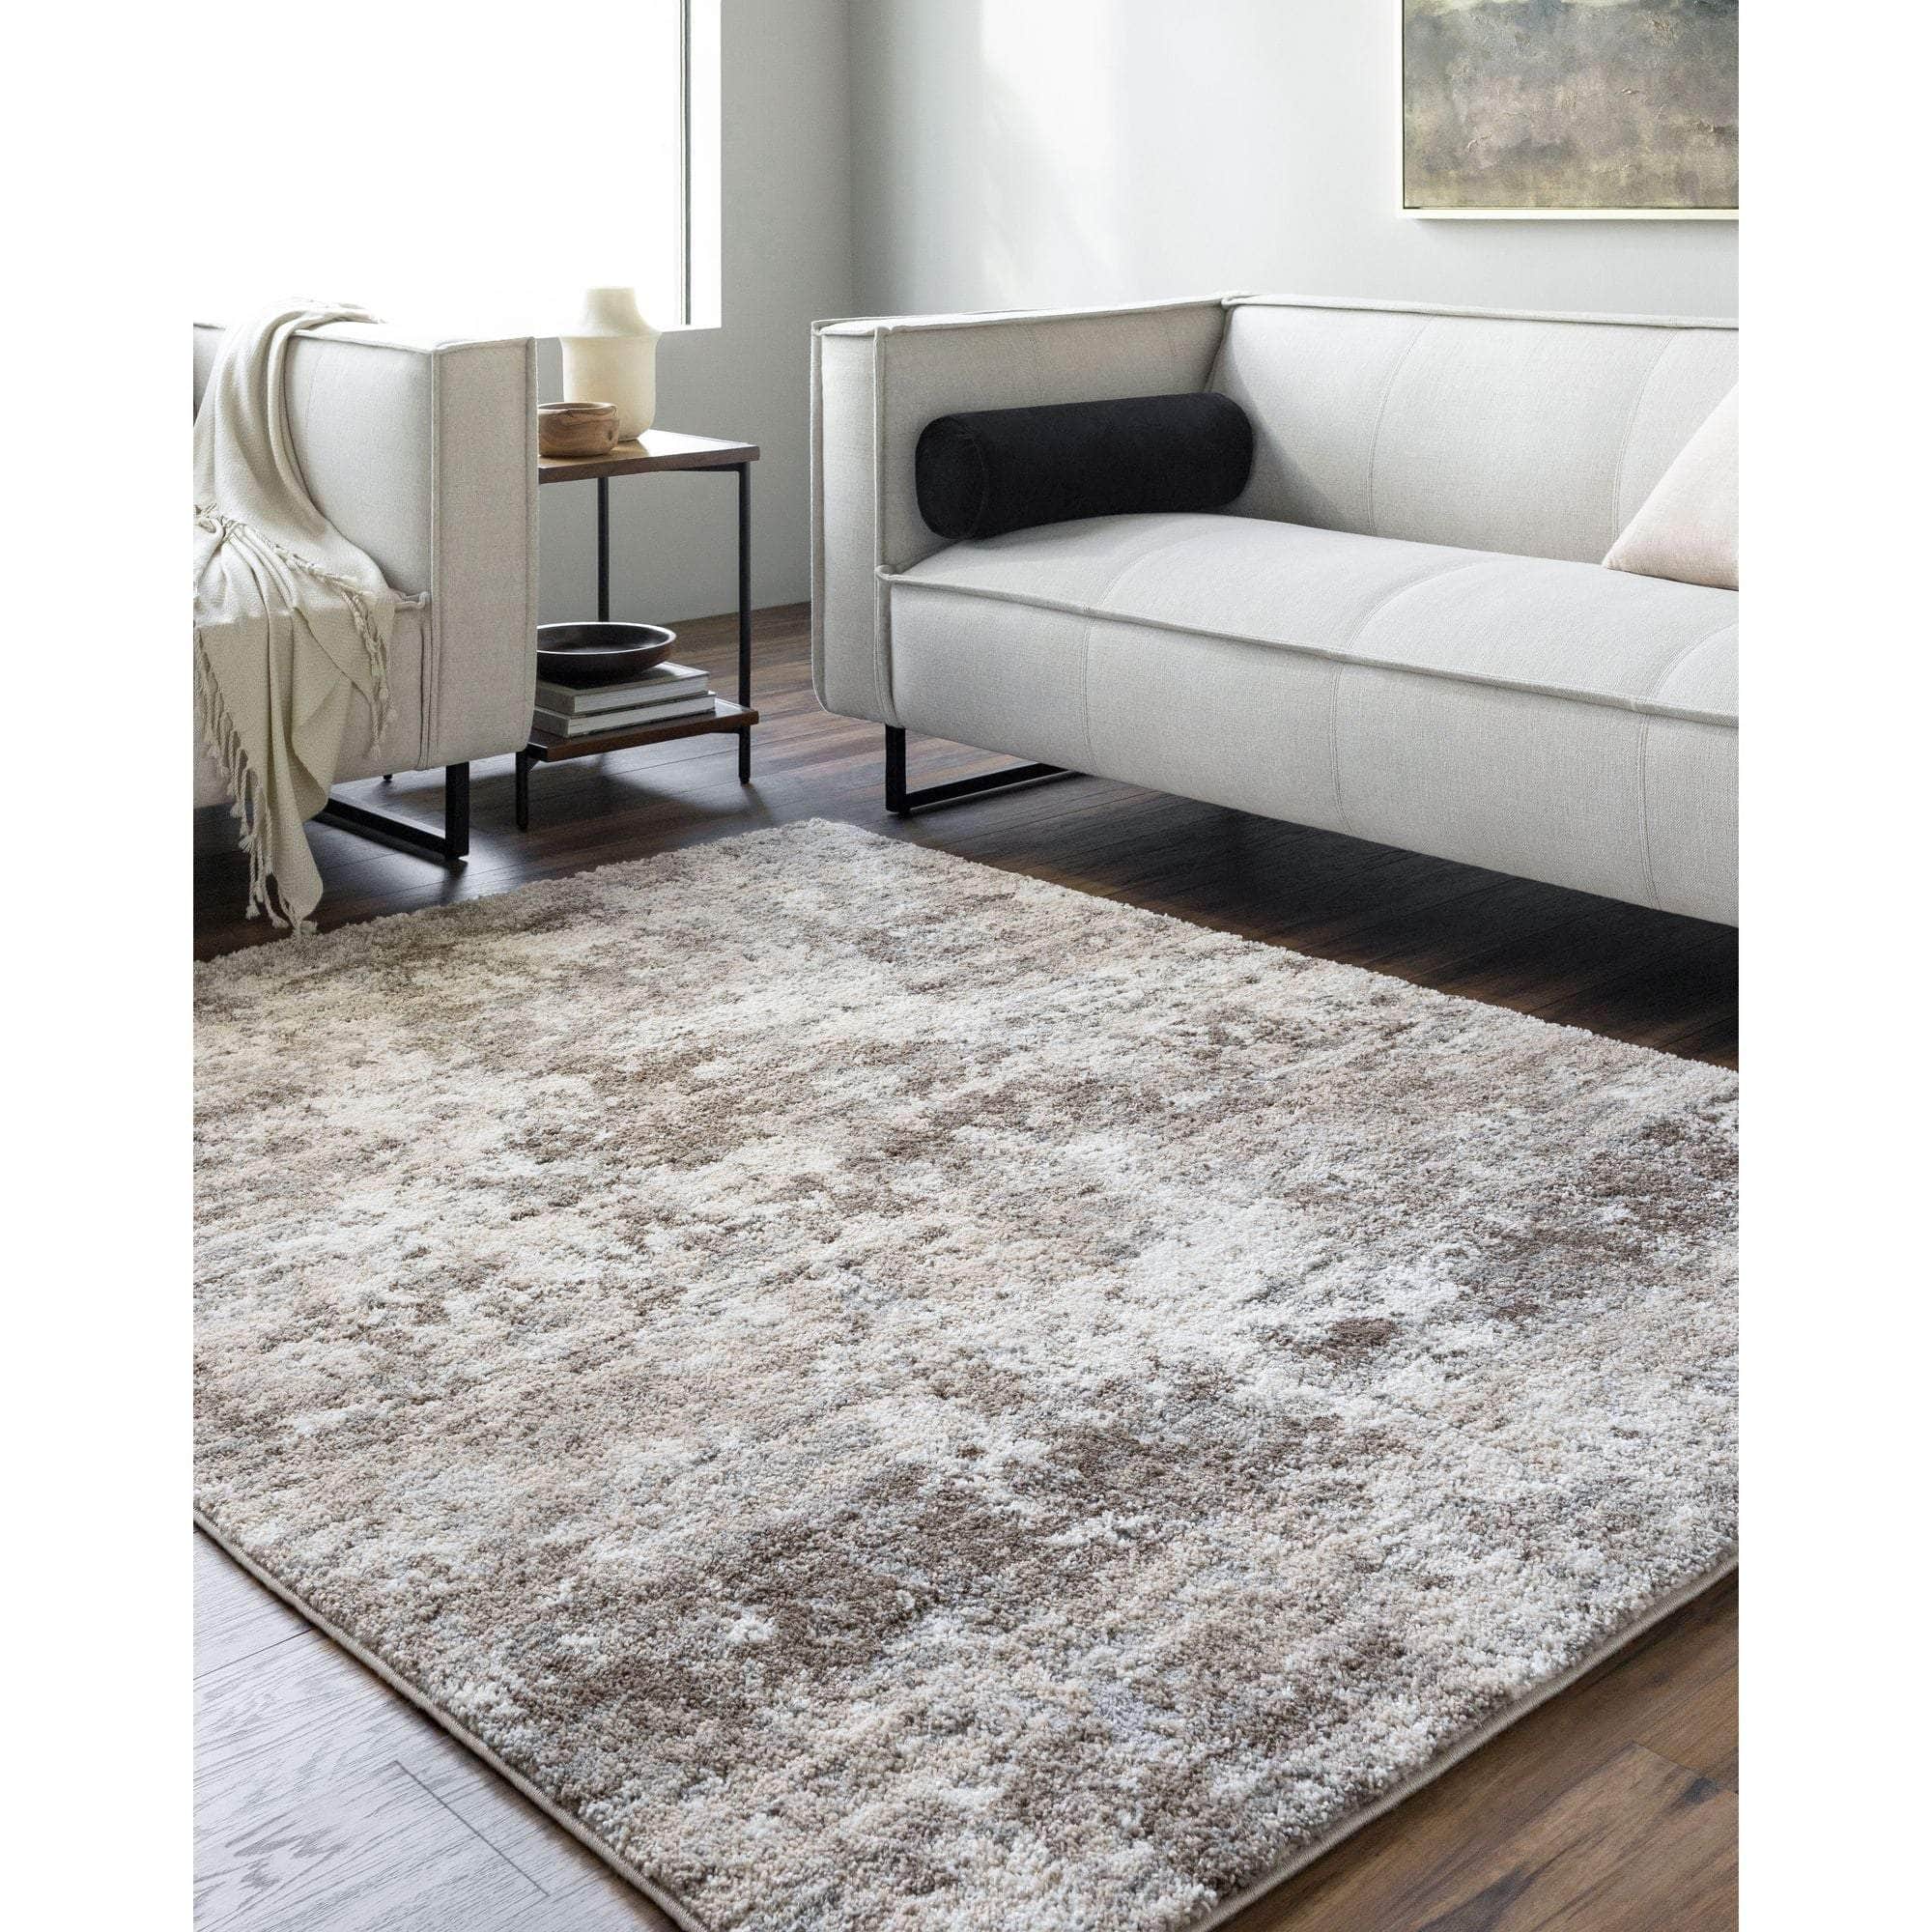 Machine Woven PTF-2319 Slate, Silver, Metallic - Silver, Sterling Grey, Sage Rugs #color_slate, silver, metallic - silver, sterling grey, sage